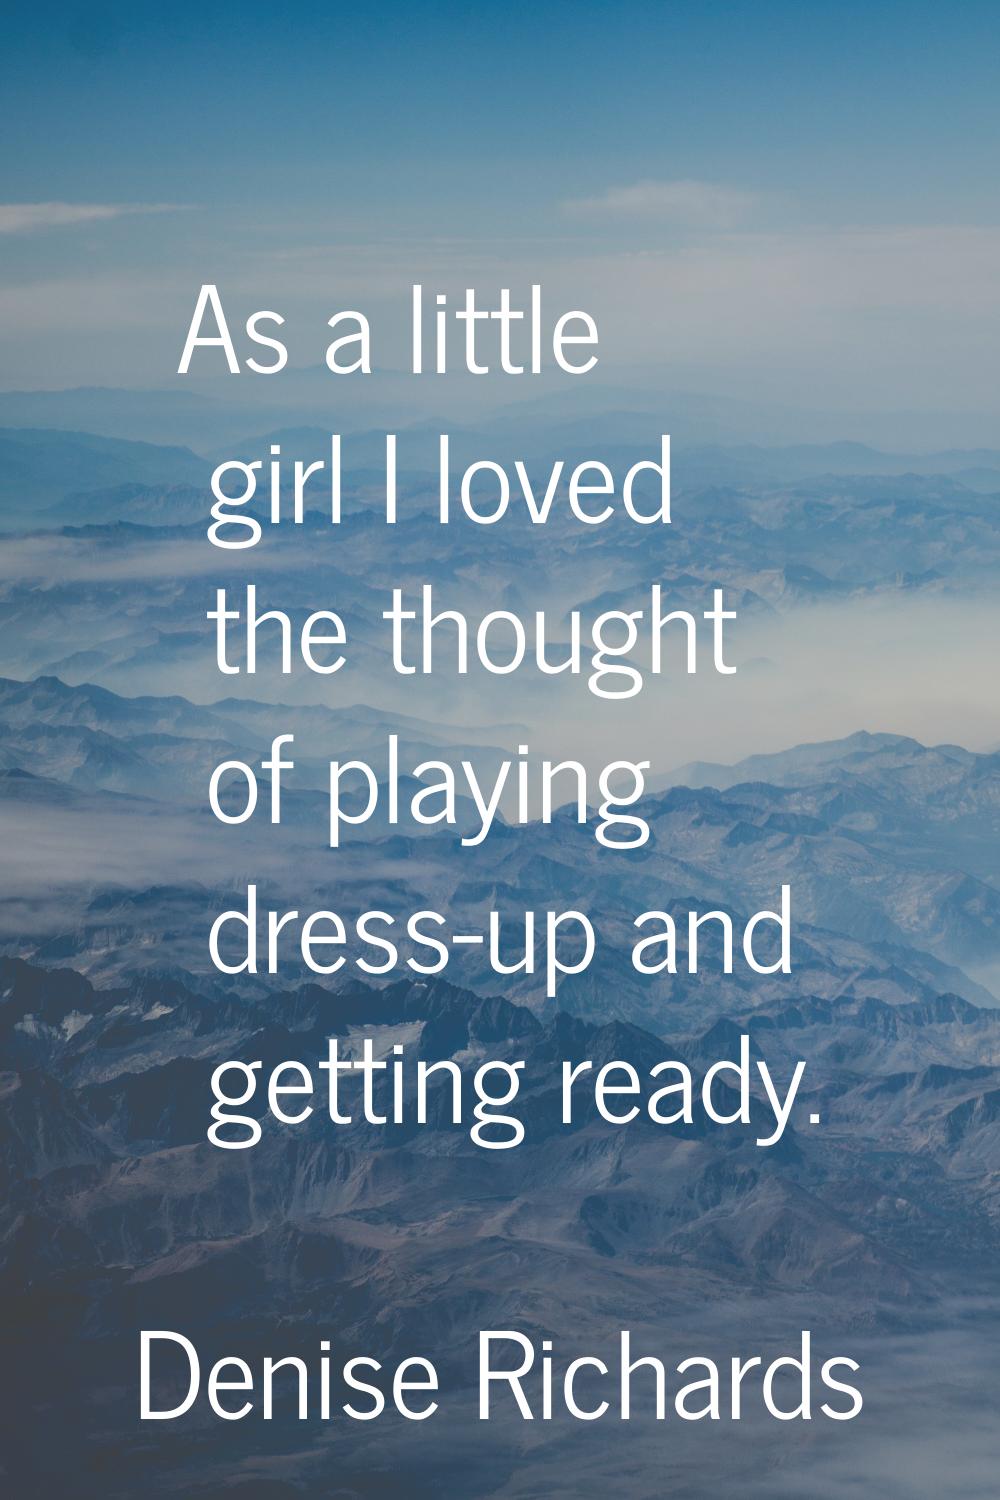 As a little girl I loved the thought of playing dress-up and getting ready.